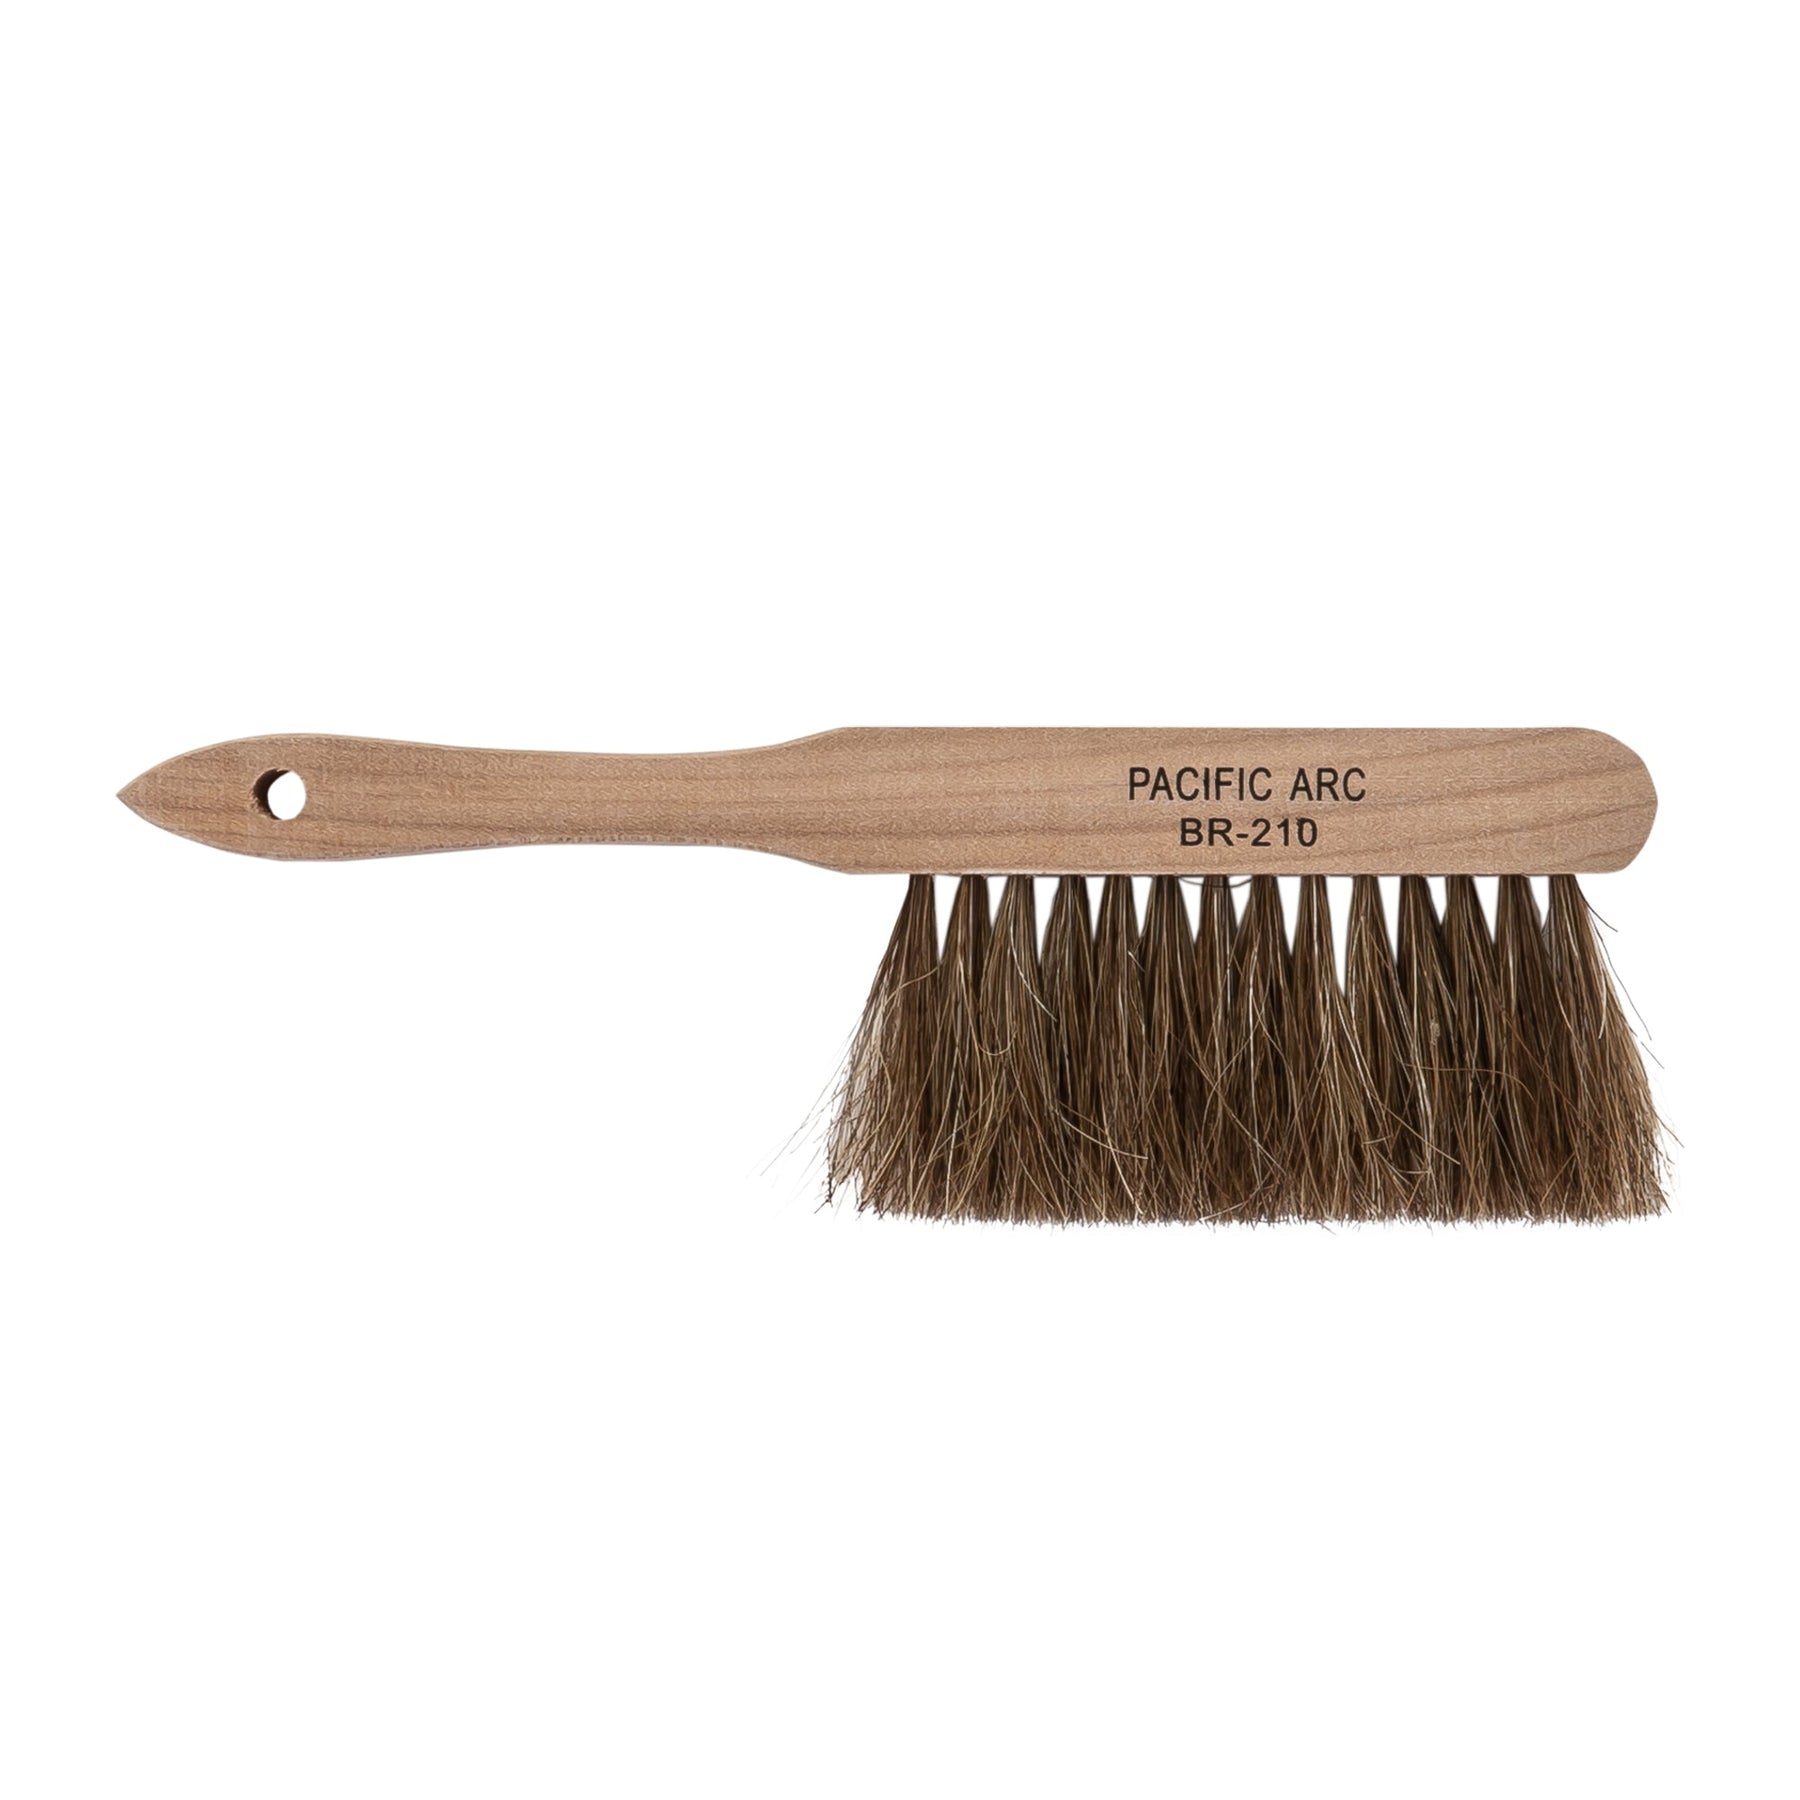 Professional Horse Hair Dust Foxtail Brush, 9 Inches for Work, Outdoor, Furniture.